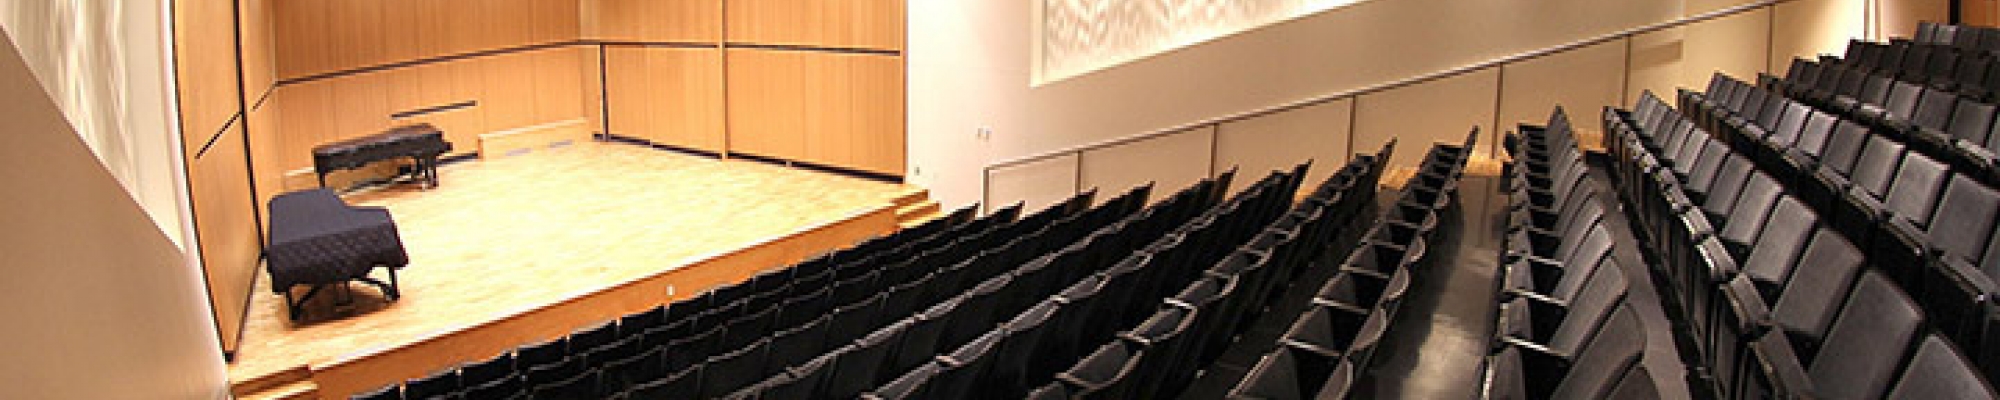 Recital hall stage with piano on it